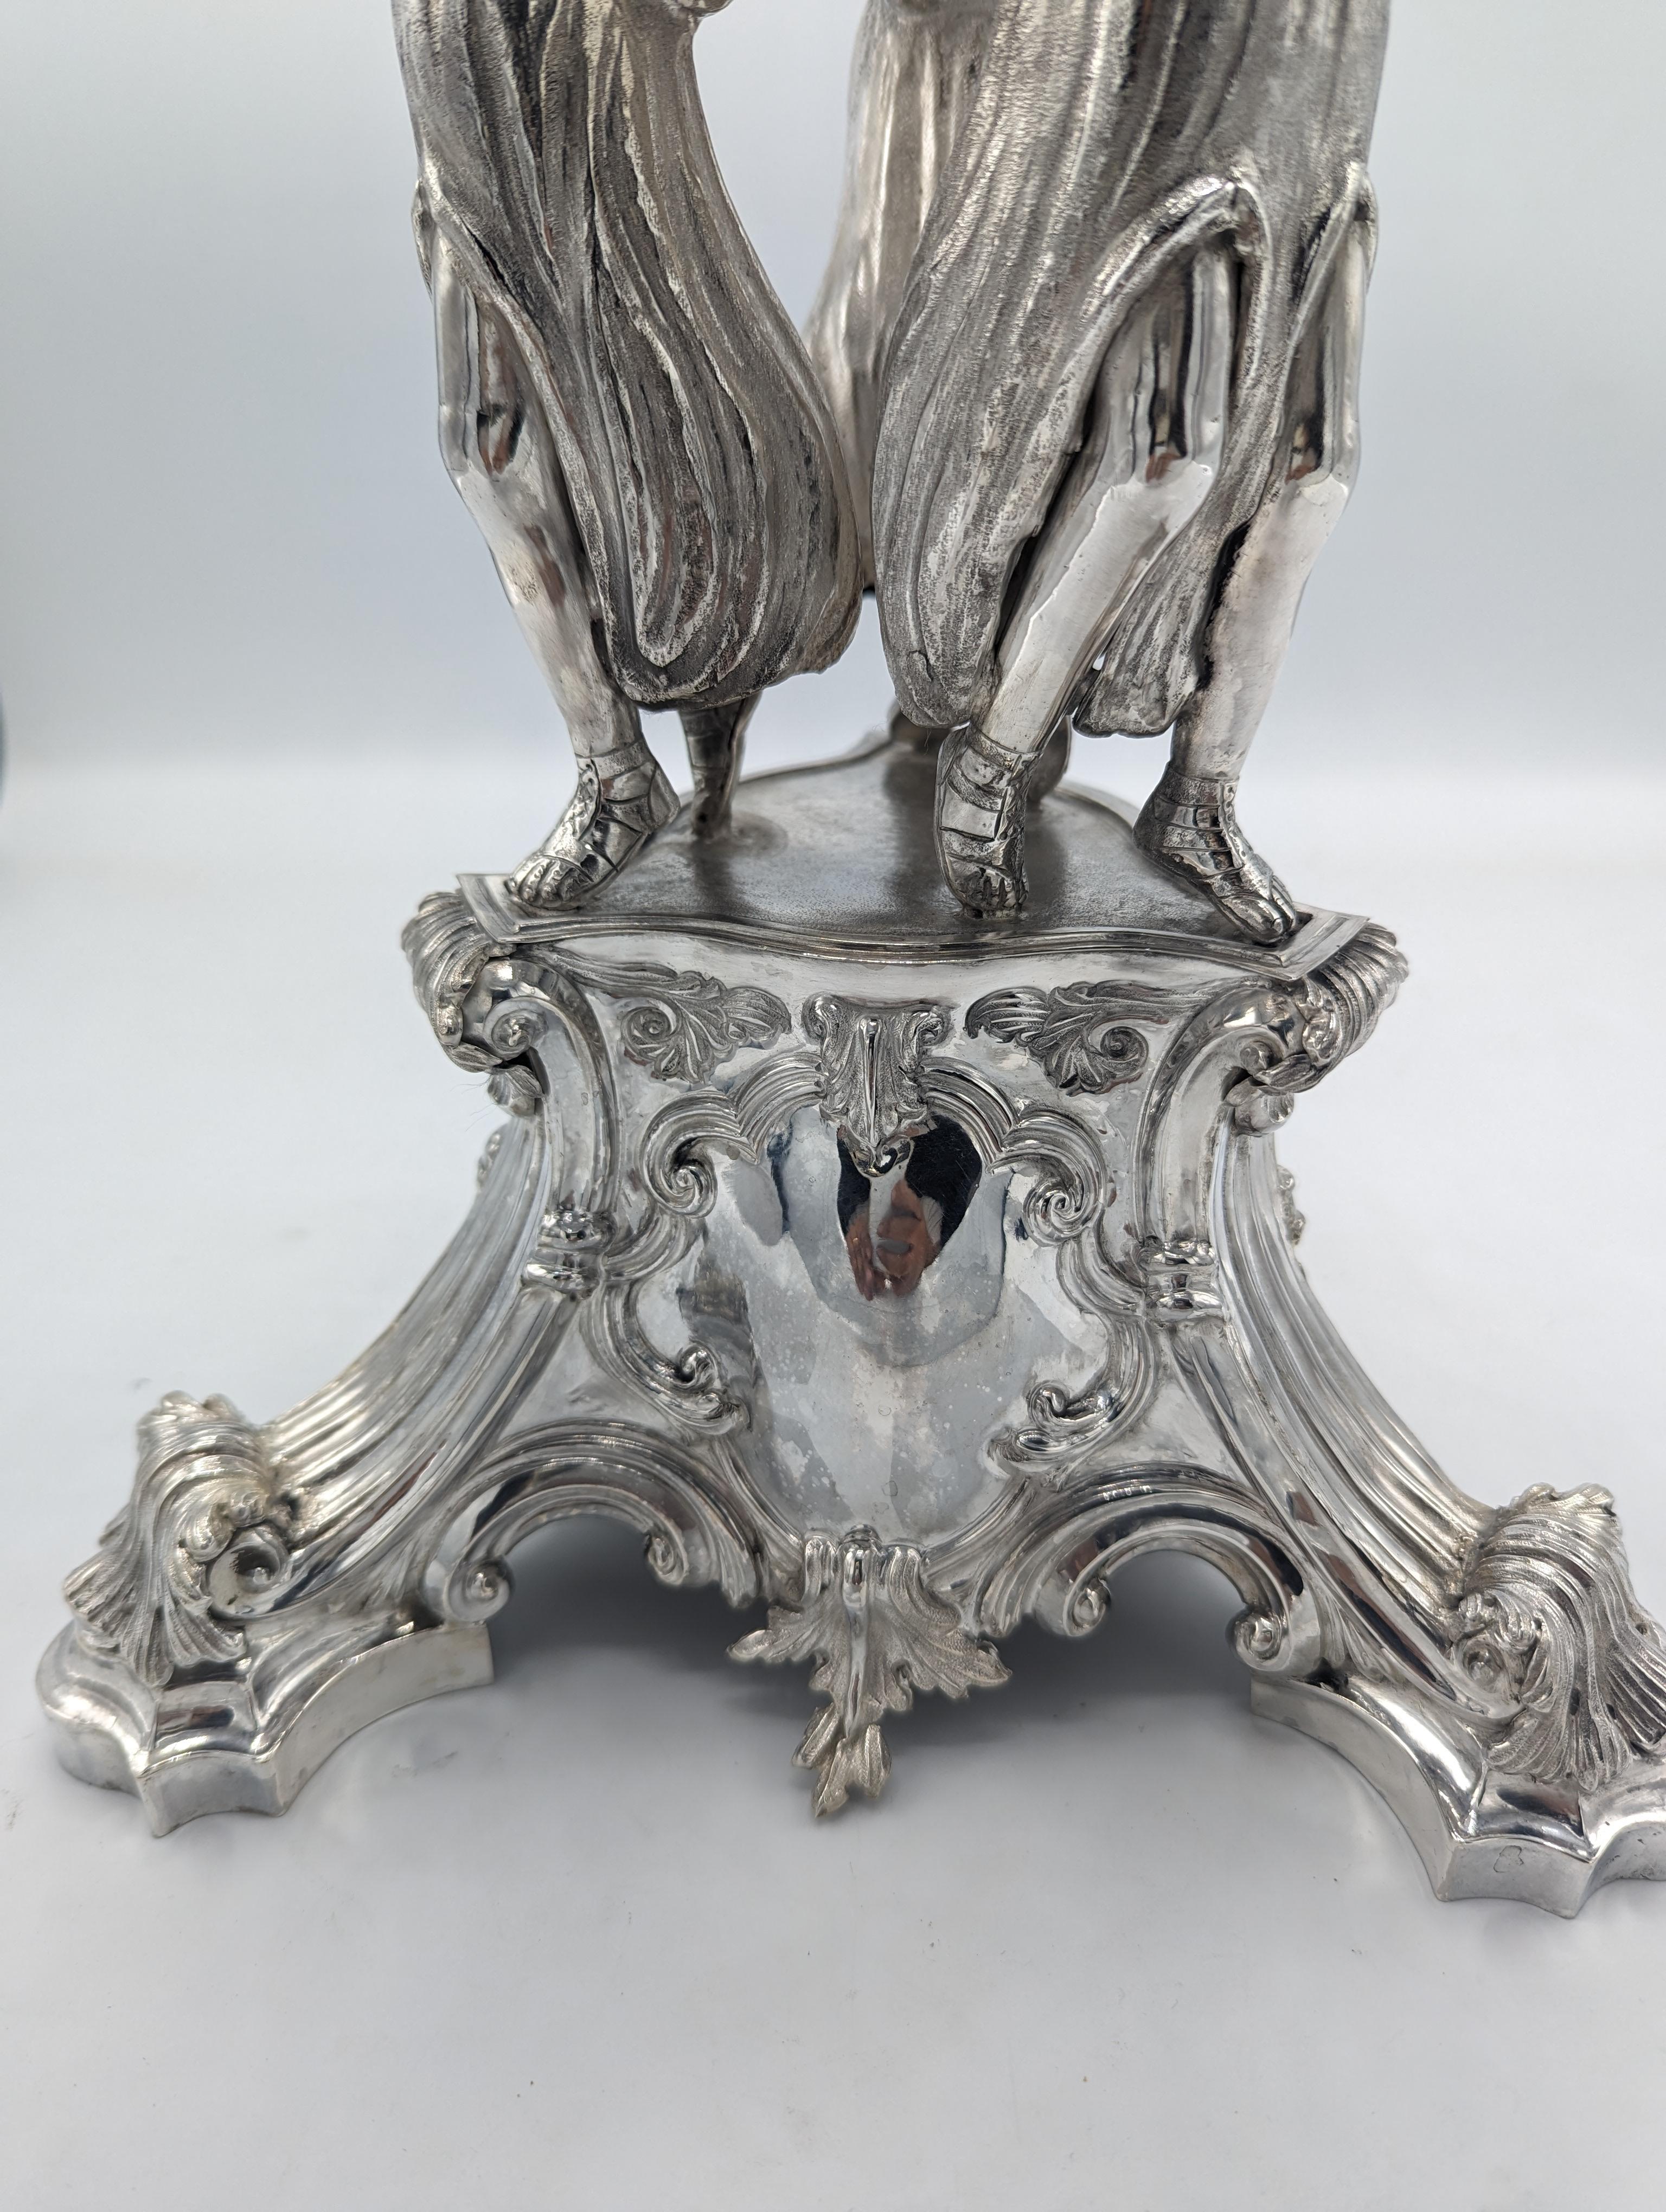 This stunning centerpiece is a work of art with a touch of history. Handcrafted by Helaria, renowned silversmiths, it features the three graces,   Aglaia, goddess of radiance and beauty; Euphrosyne, goddess of good cheer, joy and mirth; and Thalia,